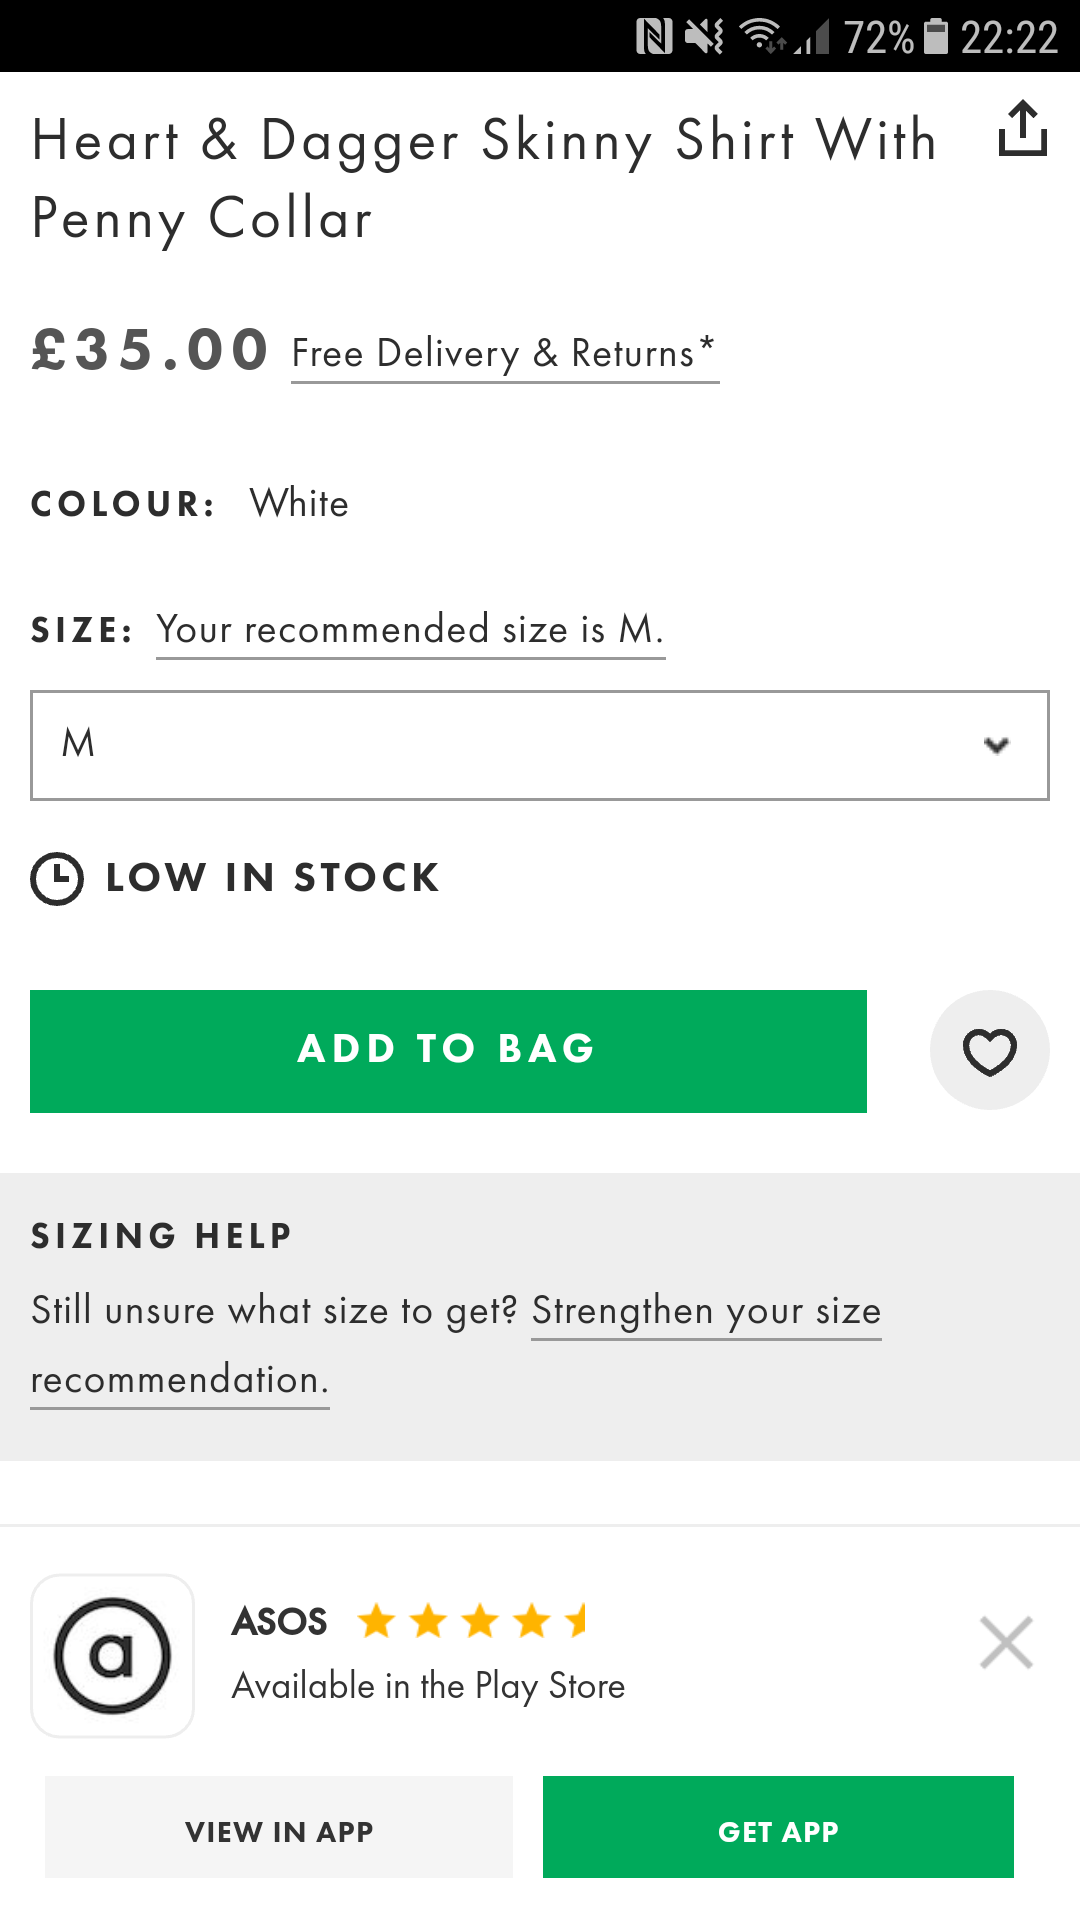 ASOS product page with good UX